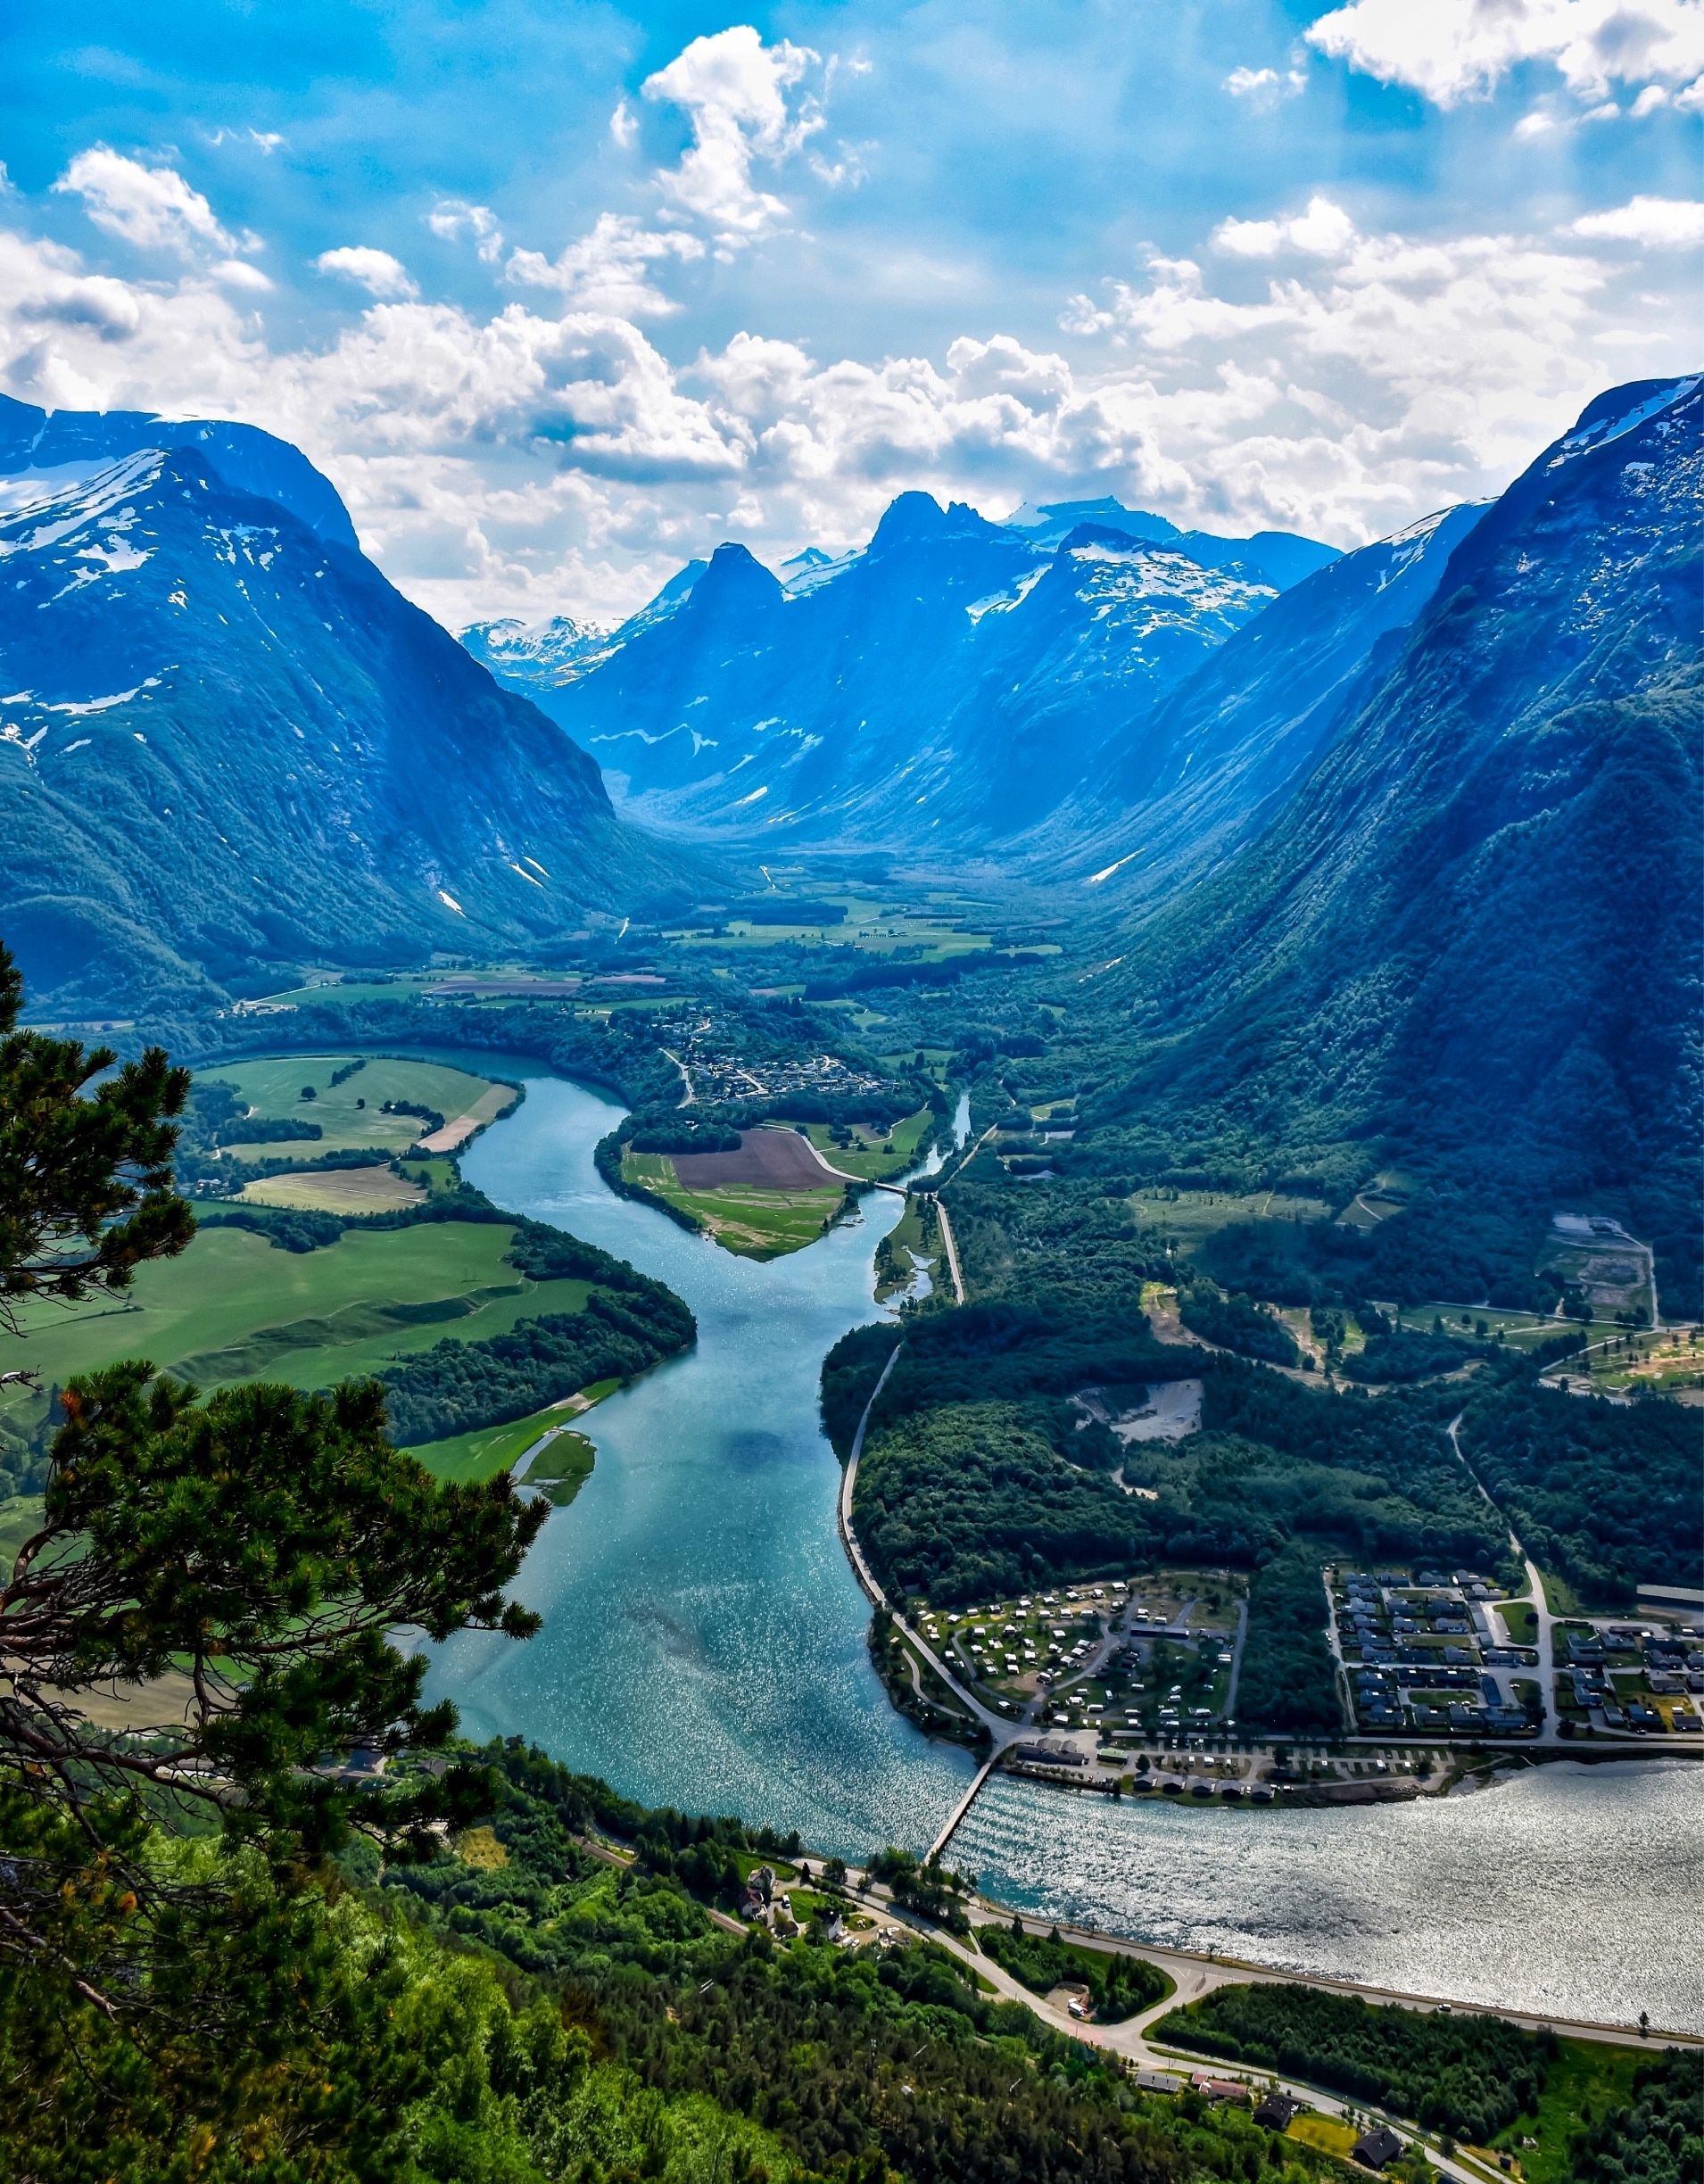 This photo was taken in early June this year during a tough 2 hour hike up from the town of Andalsnes to the Rampestreken viewpoint. The Photo does the view no justice at all. Absolutely stunning!! Highly recommended hike if in the area. #roadtrip #travel #mountains #river #norway #hike #perspectives